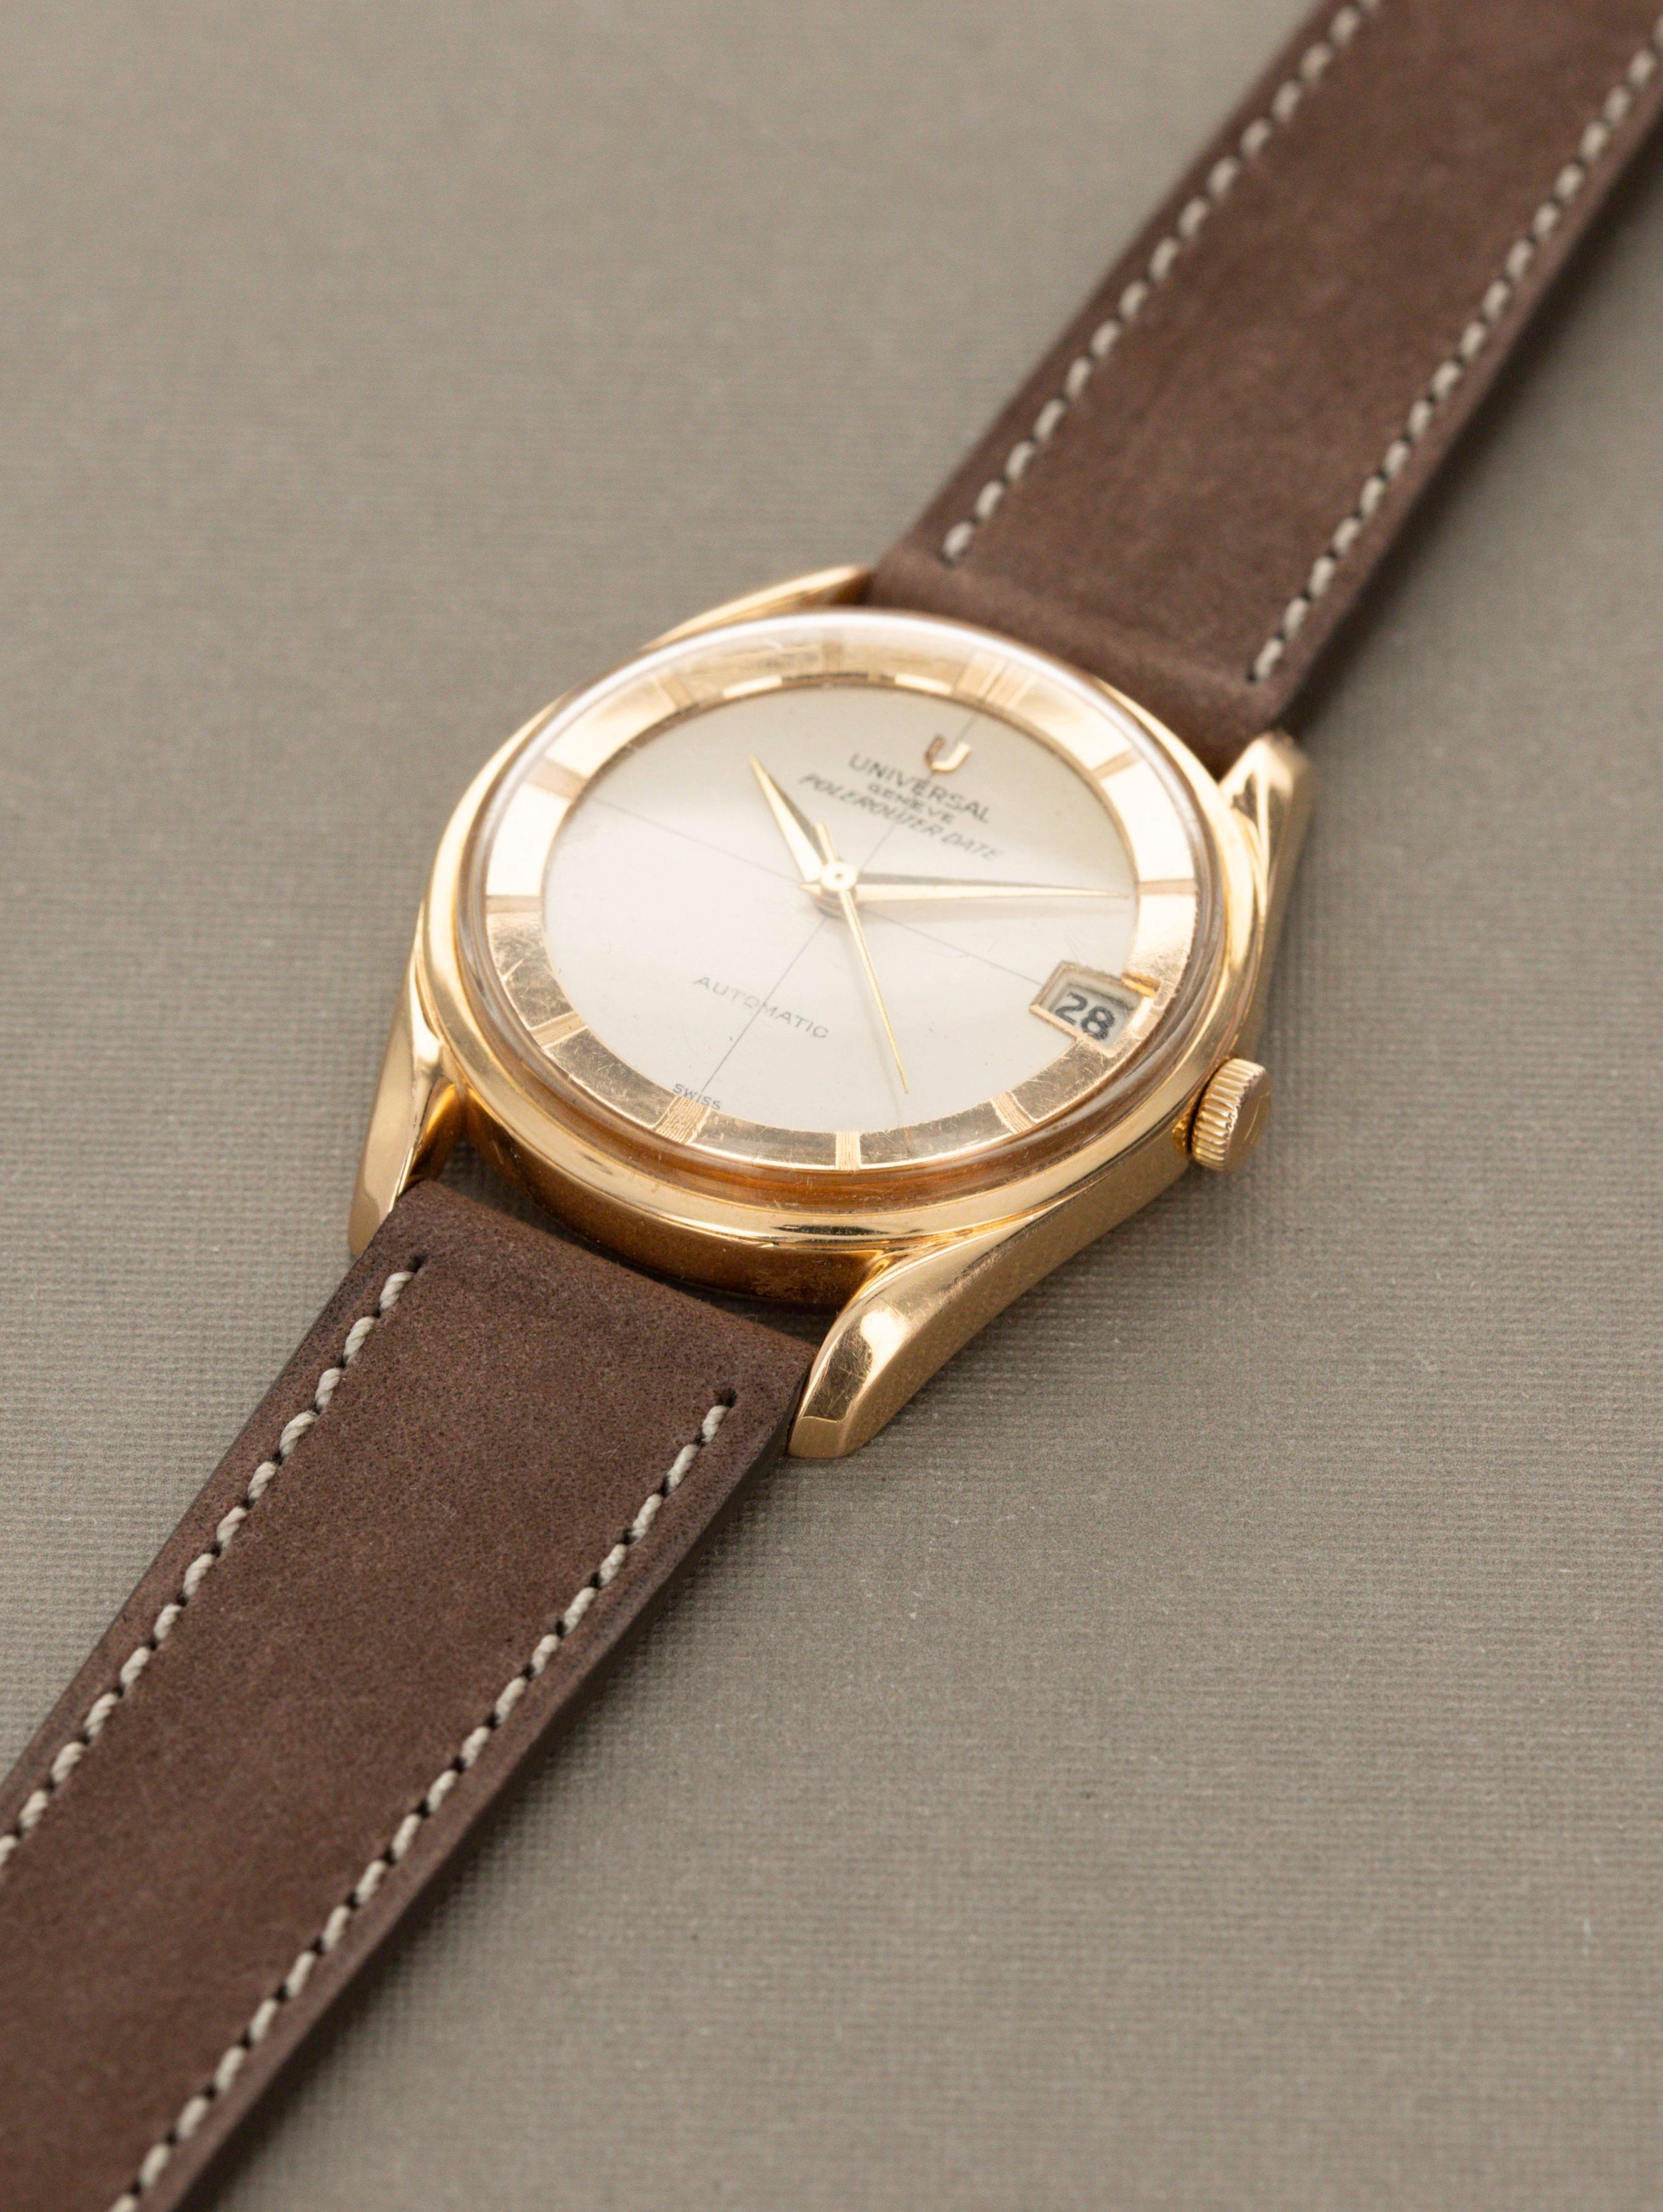 Universal Geneve Polerouter Date - Rose Gold